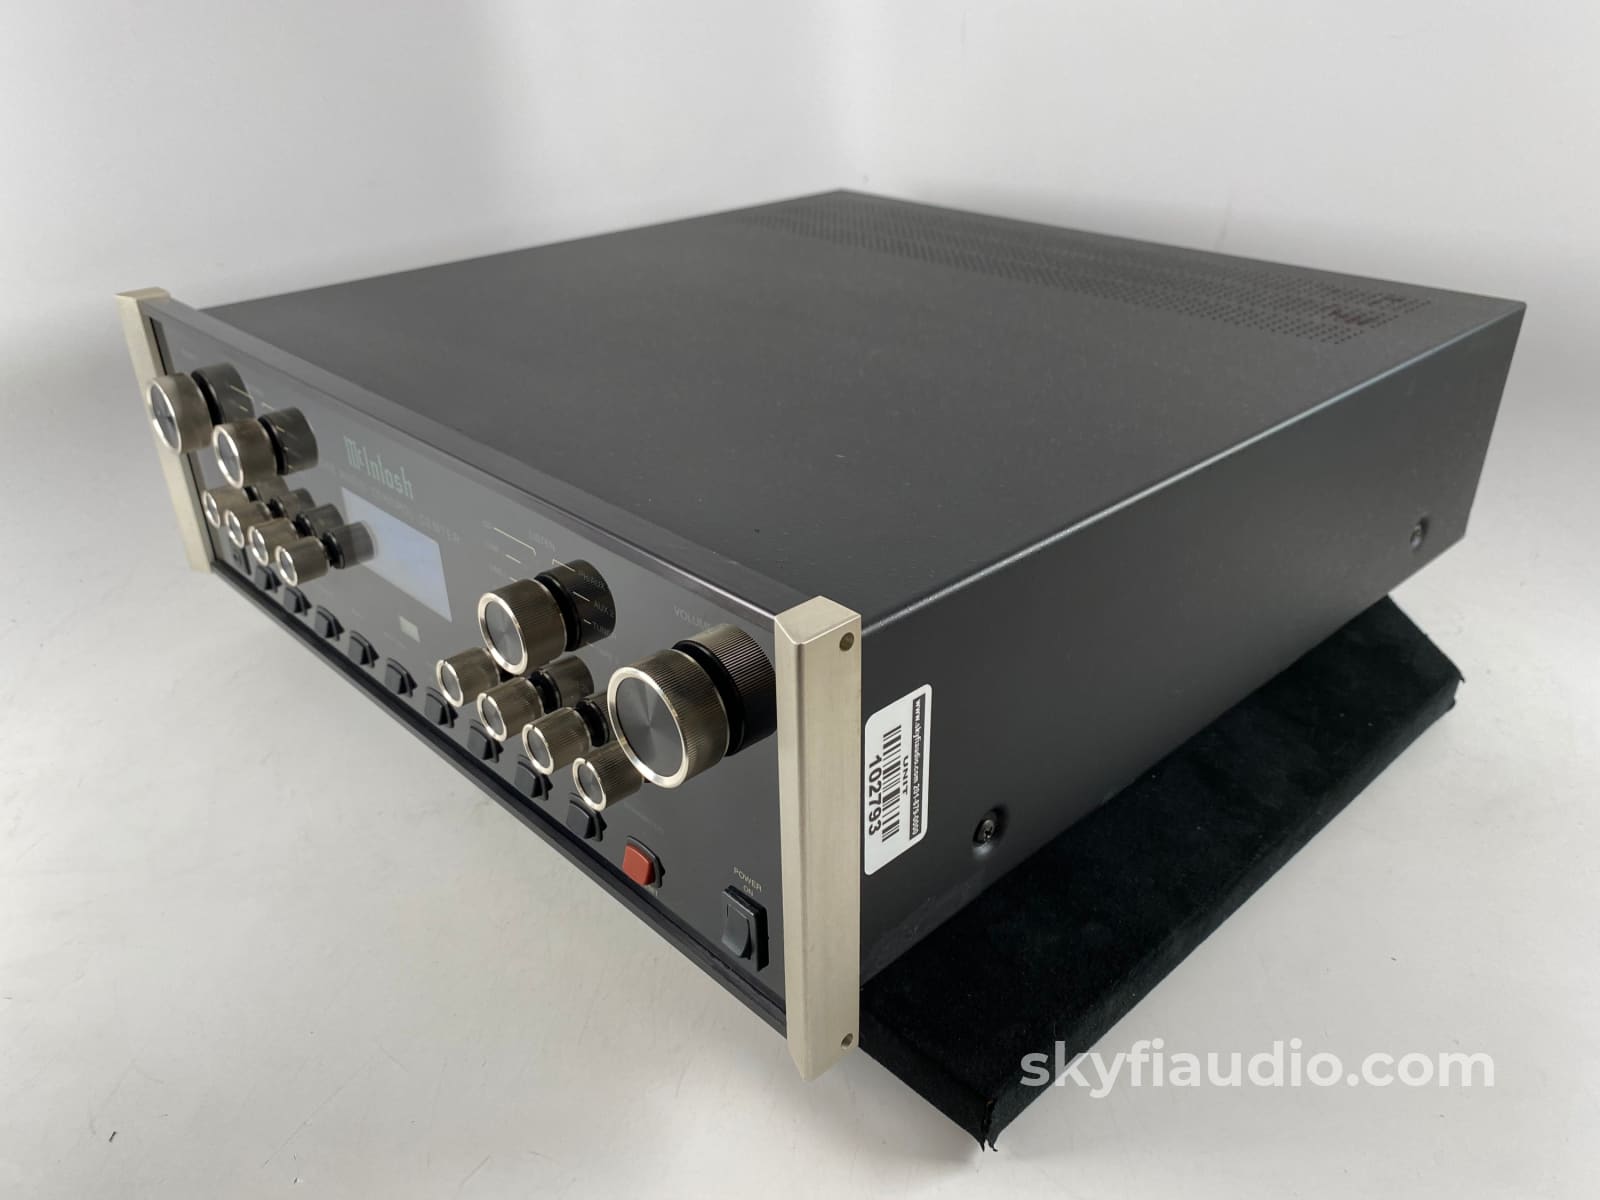 Mcintosh C42 Analog Preamplifier With Exclusive 8-Band Equalizer And Phono